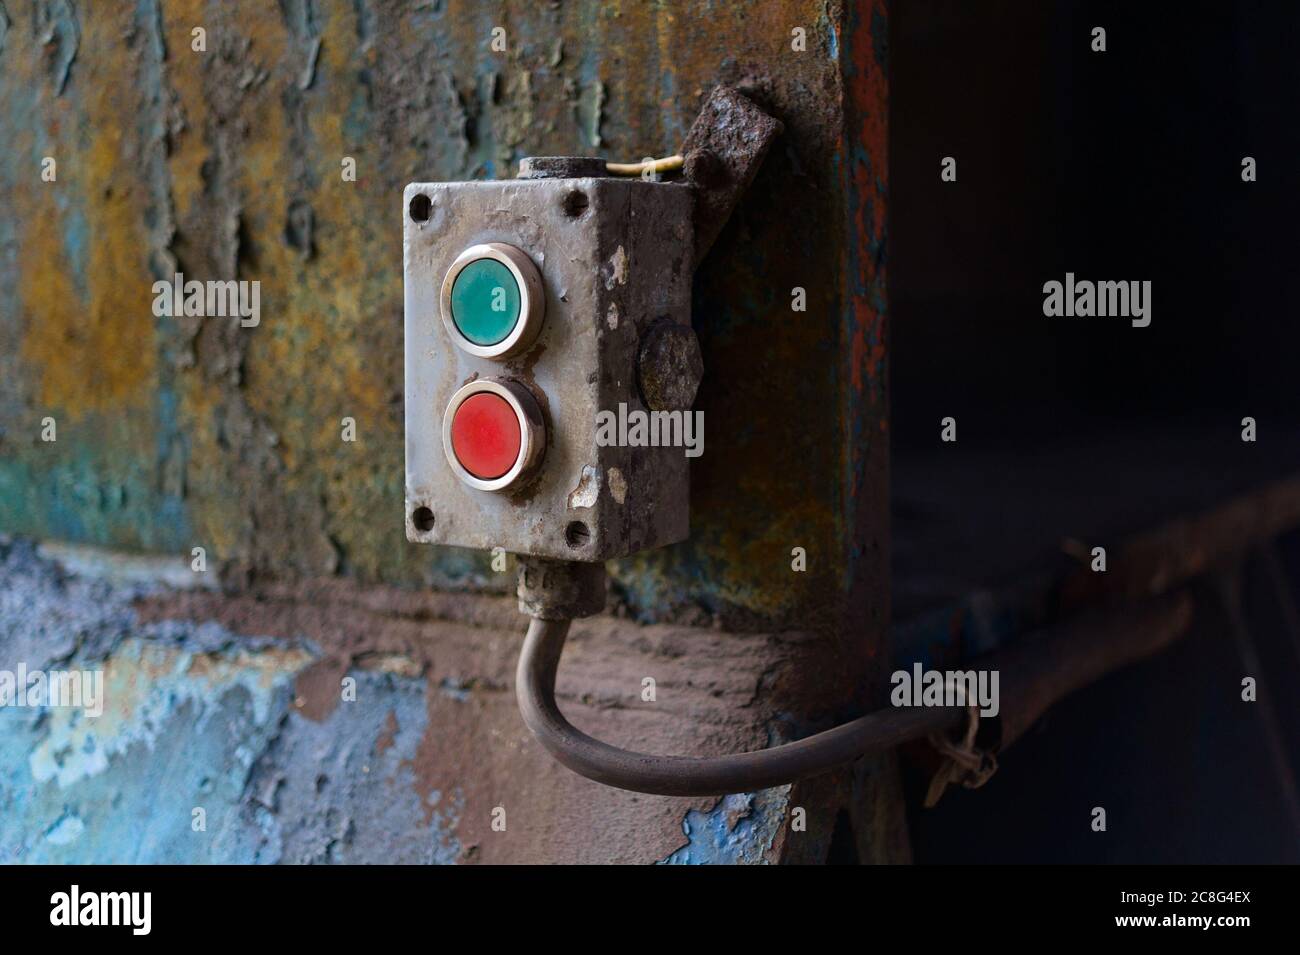 Device to control industrial machine with red and green button tu turn on or switch off. Rusty panel is old and faded Stock Photo